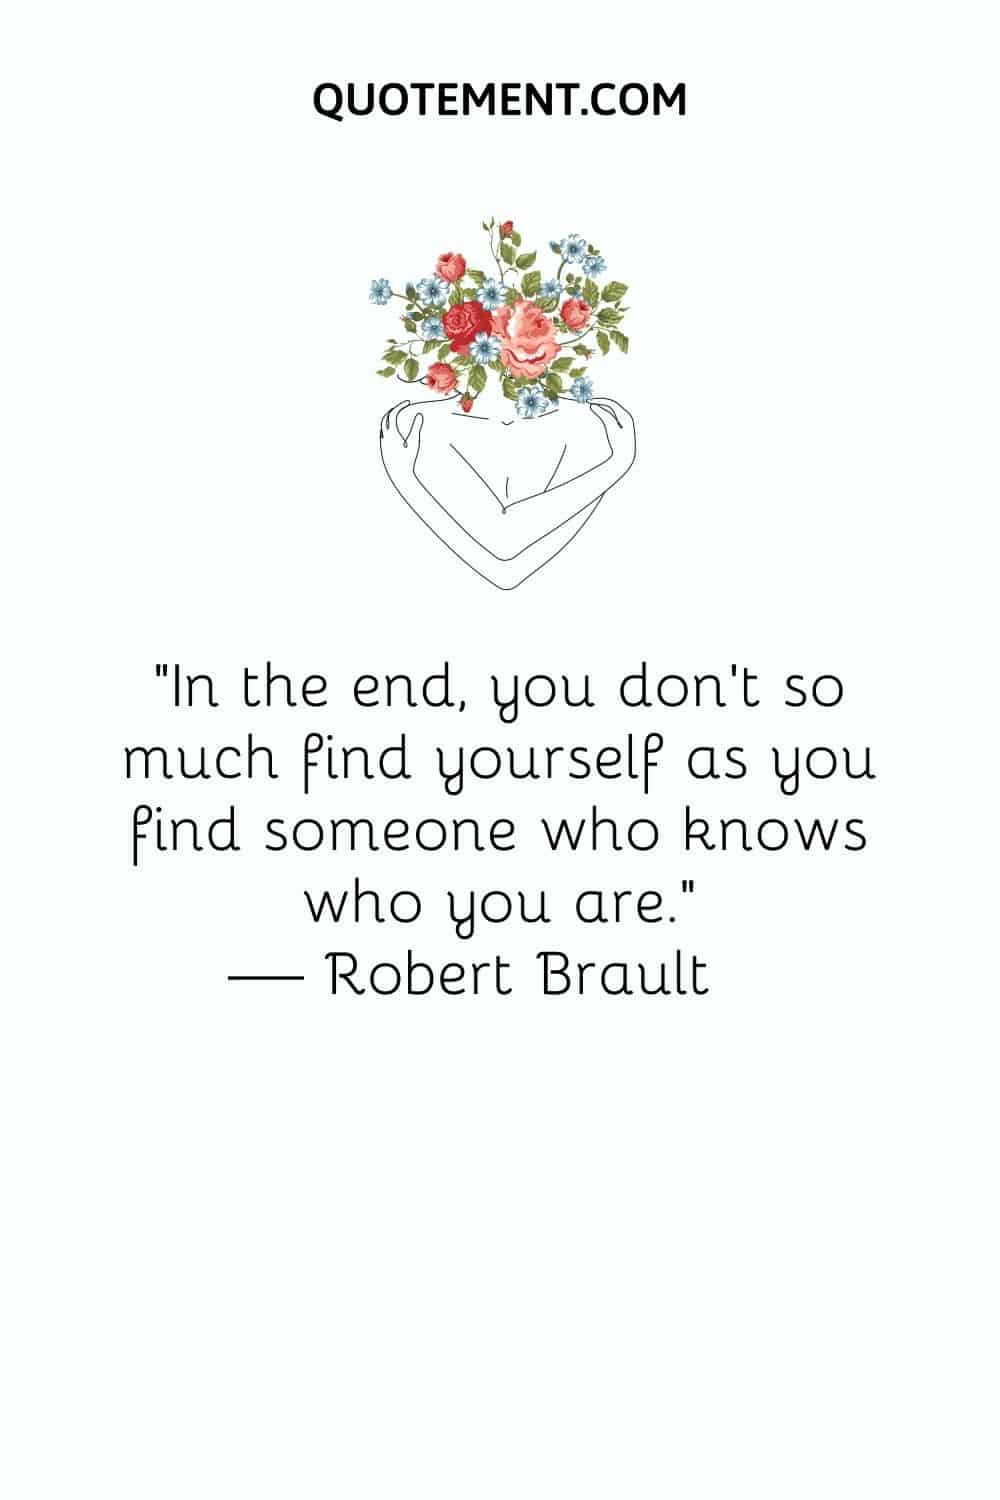 In the end, you don't so much find yourself as you find someone who knows who you are